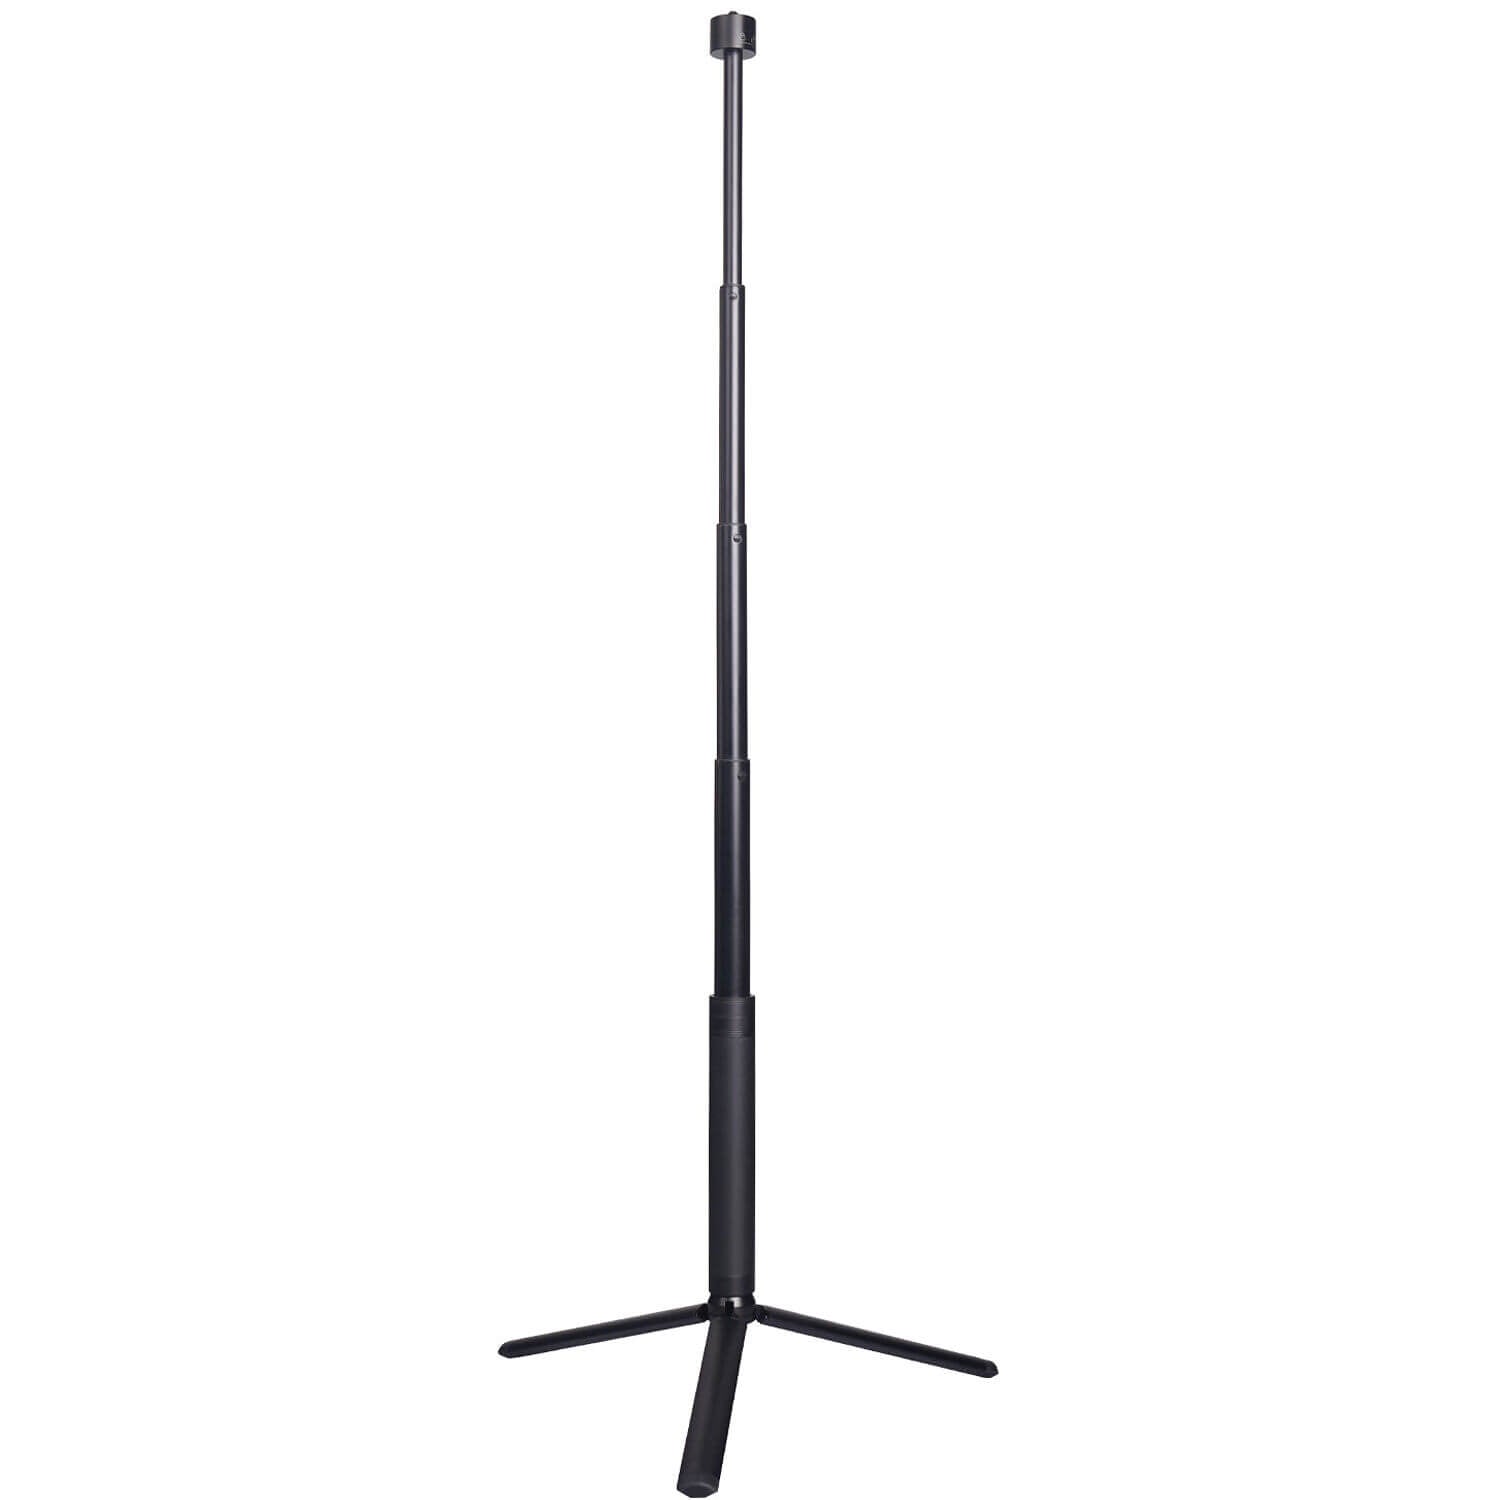 OBSBOT OTB-2110-CE - Extendable Tripod for Tiny Series Webcams, extended